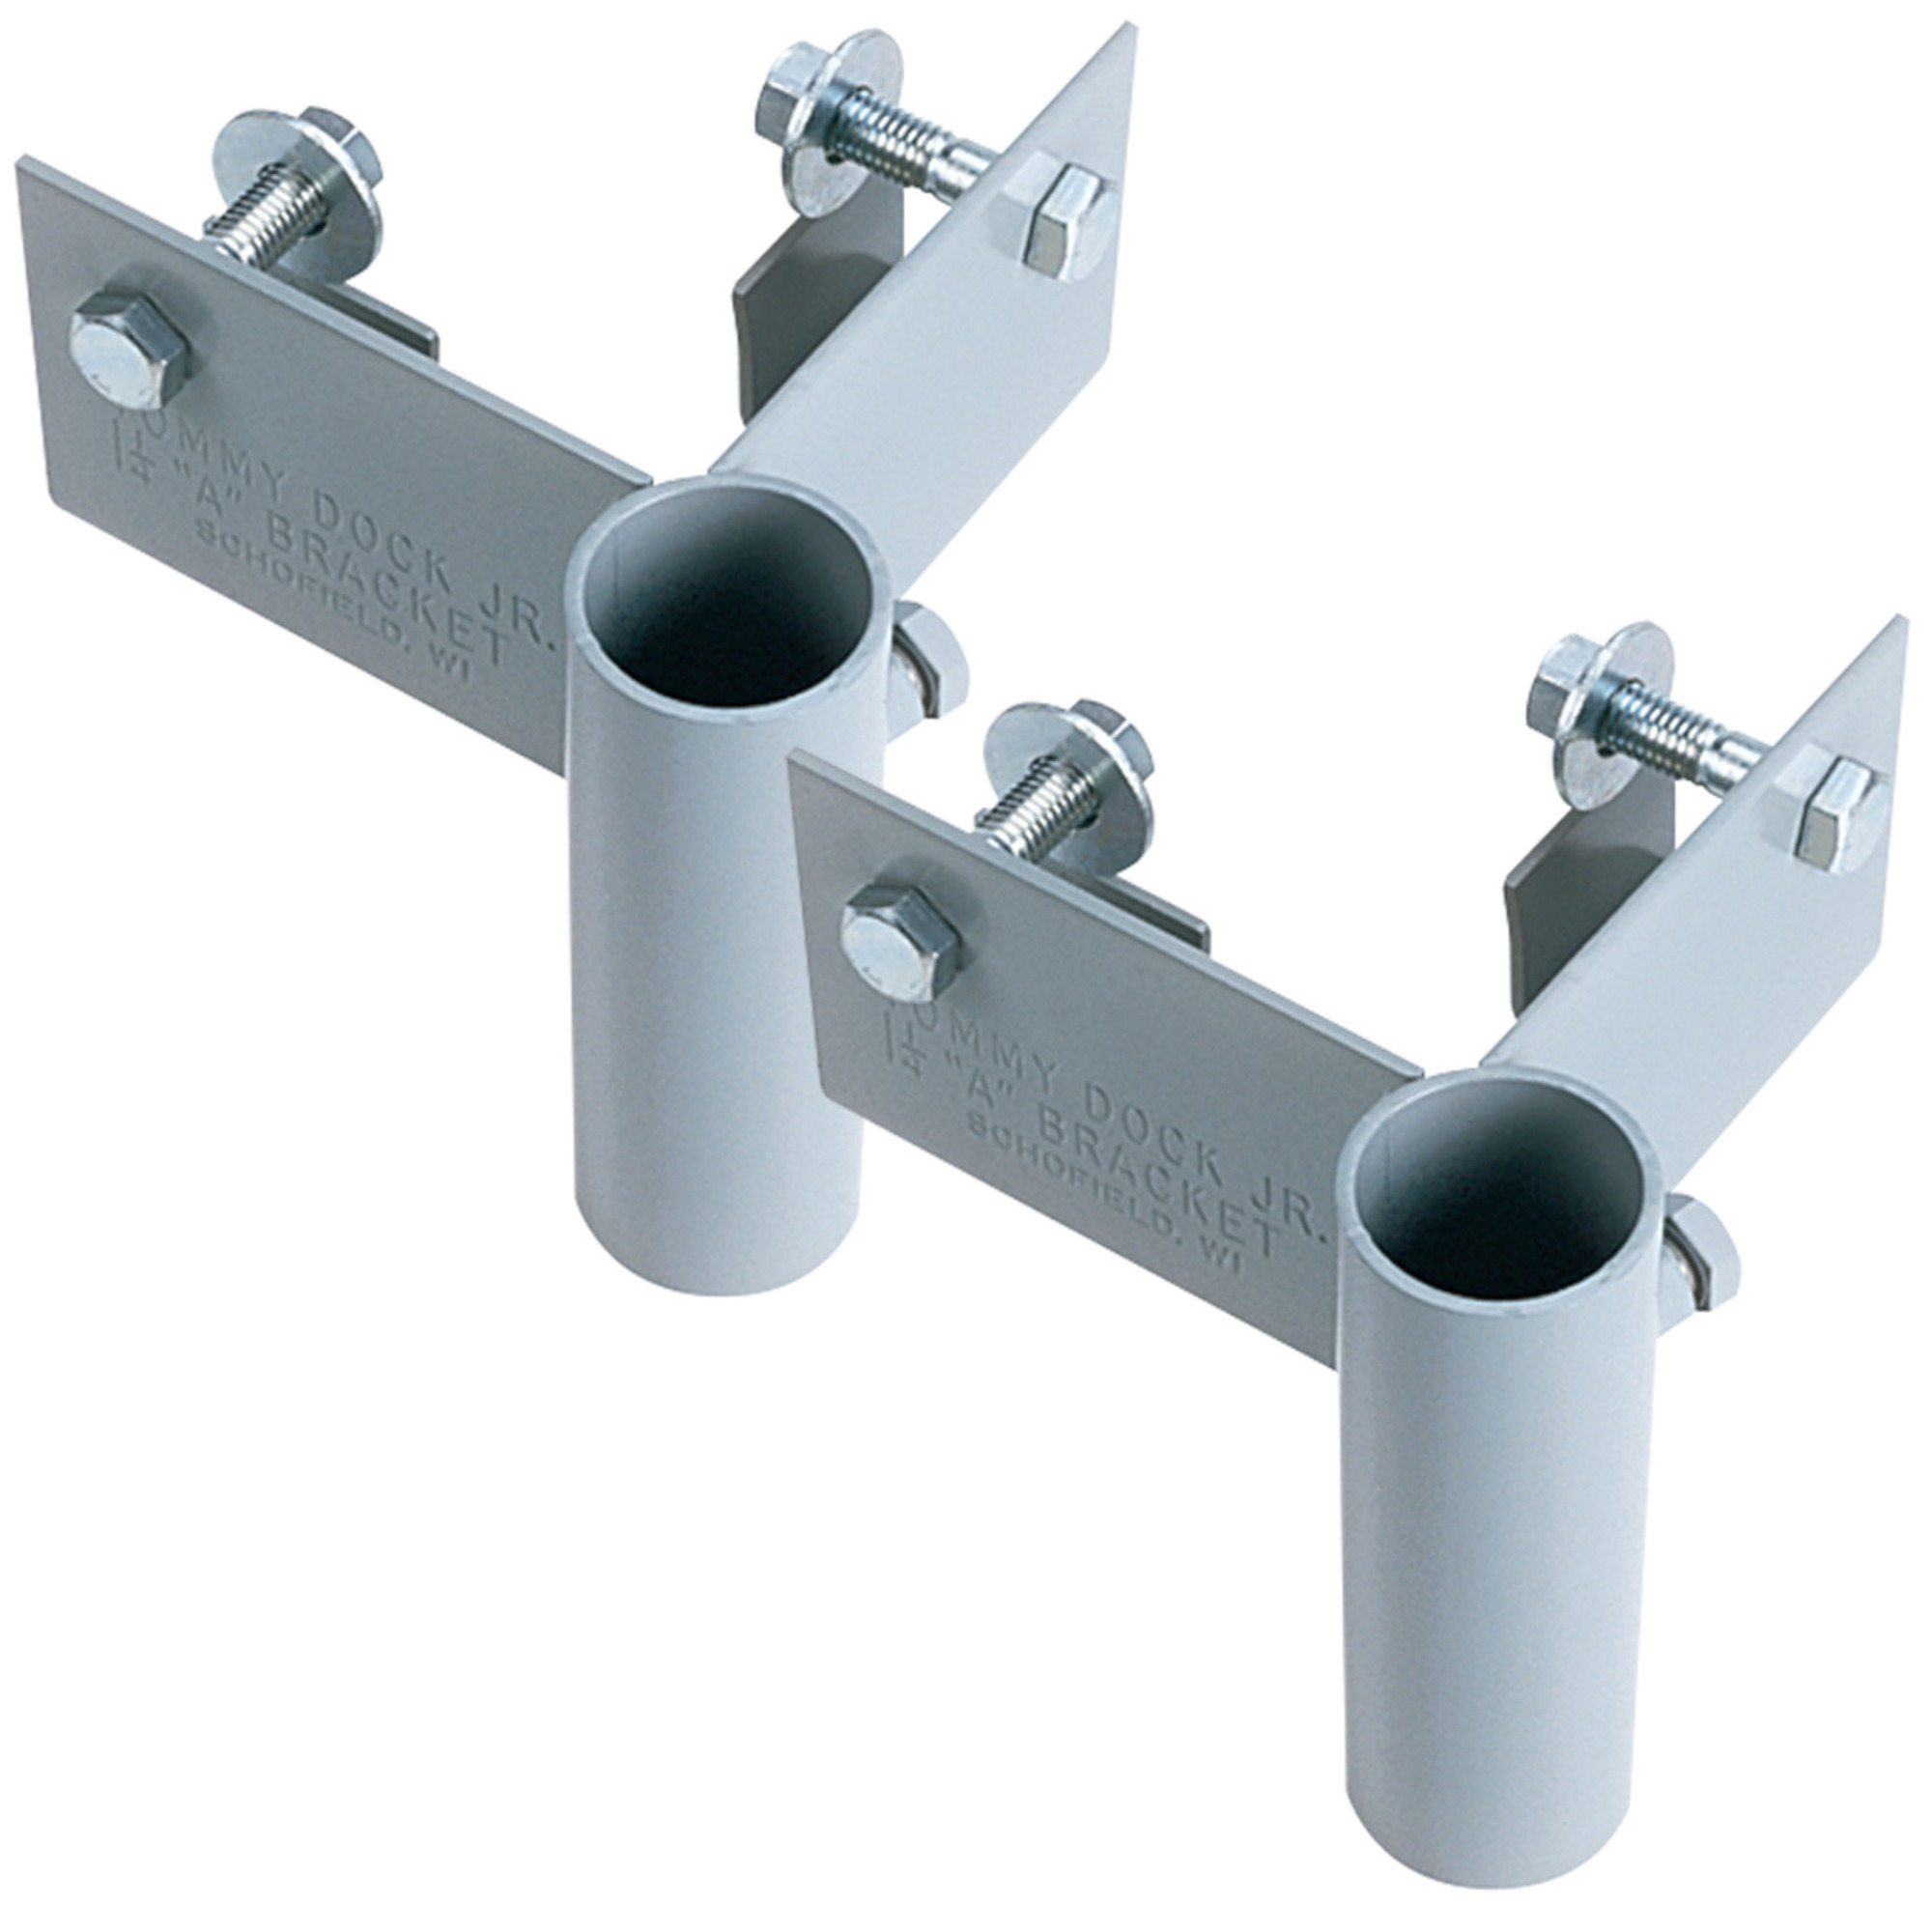 "Tommy Docks, ""A"" Outside Corner 2-Pack, Product Type Hardware, Length 12.25 in, Width 8.25 in, Model A-50000-2"